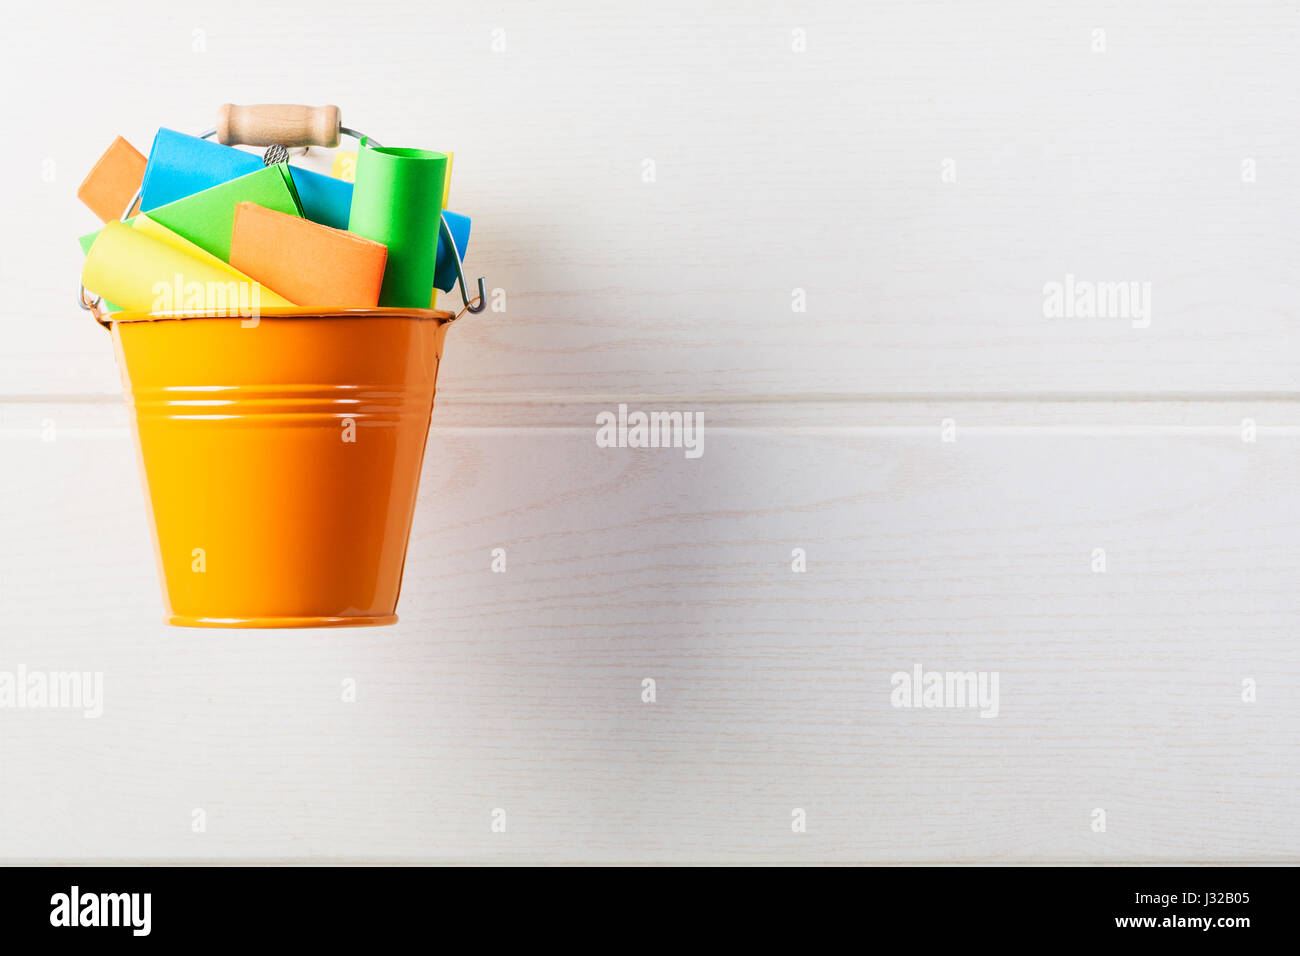 Bucket list concept. Orange bucket with colorful paper notes hanging on white wooden wall Stock Photo